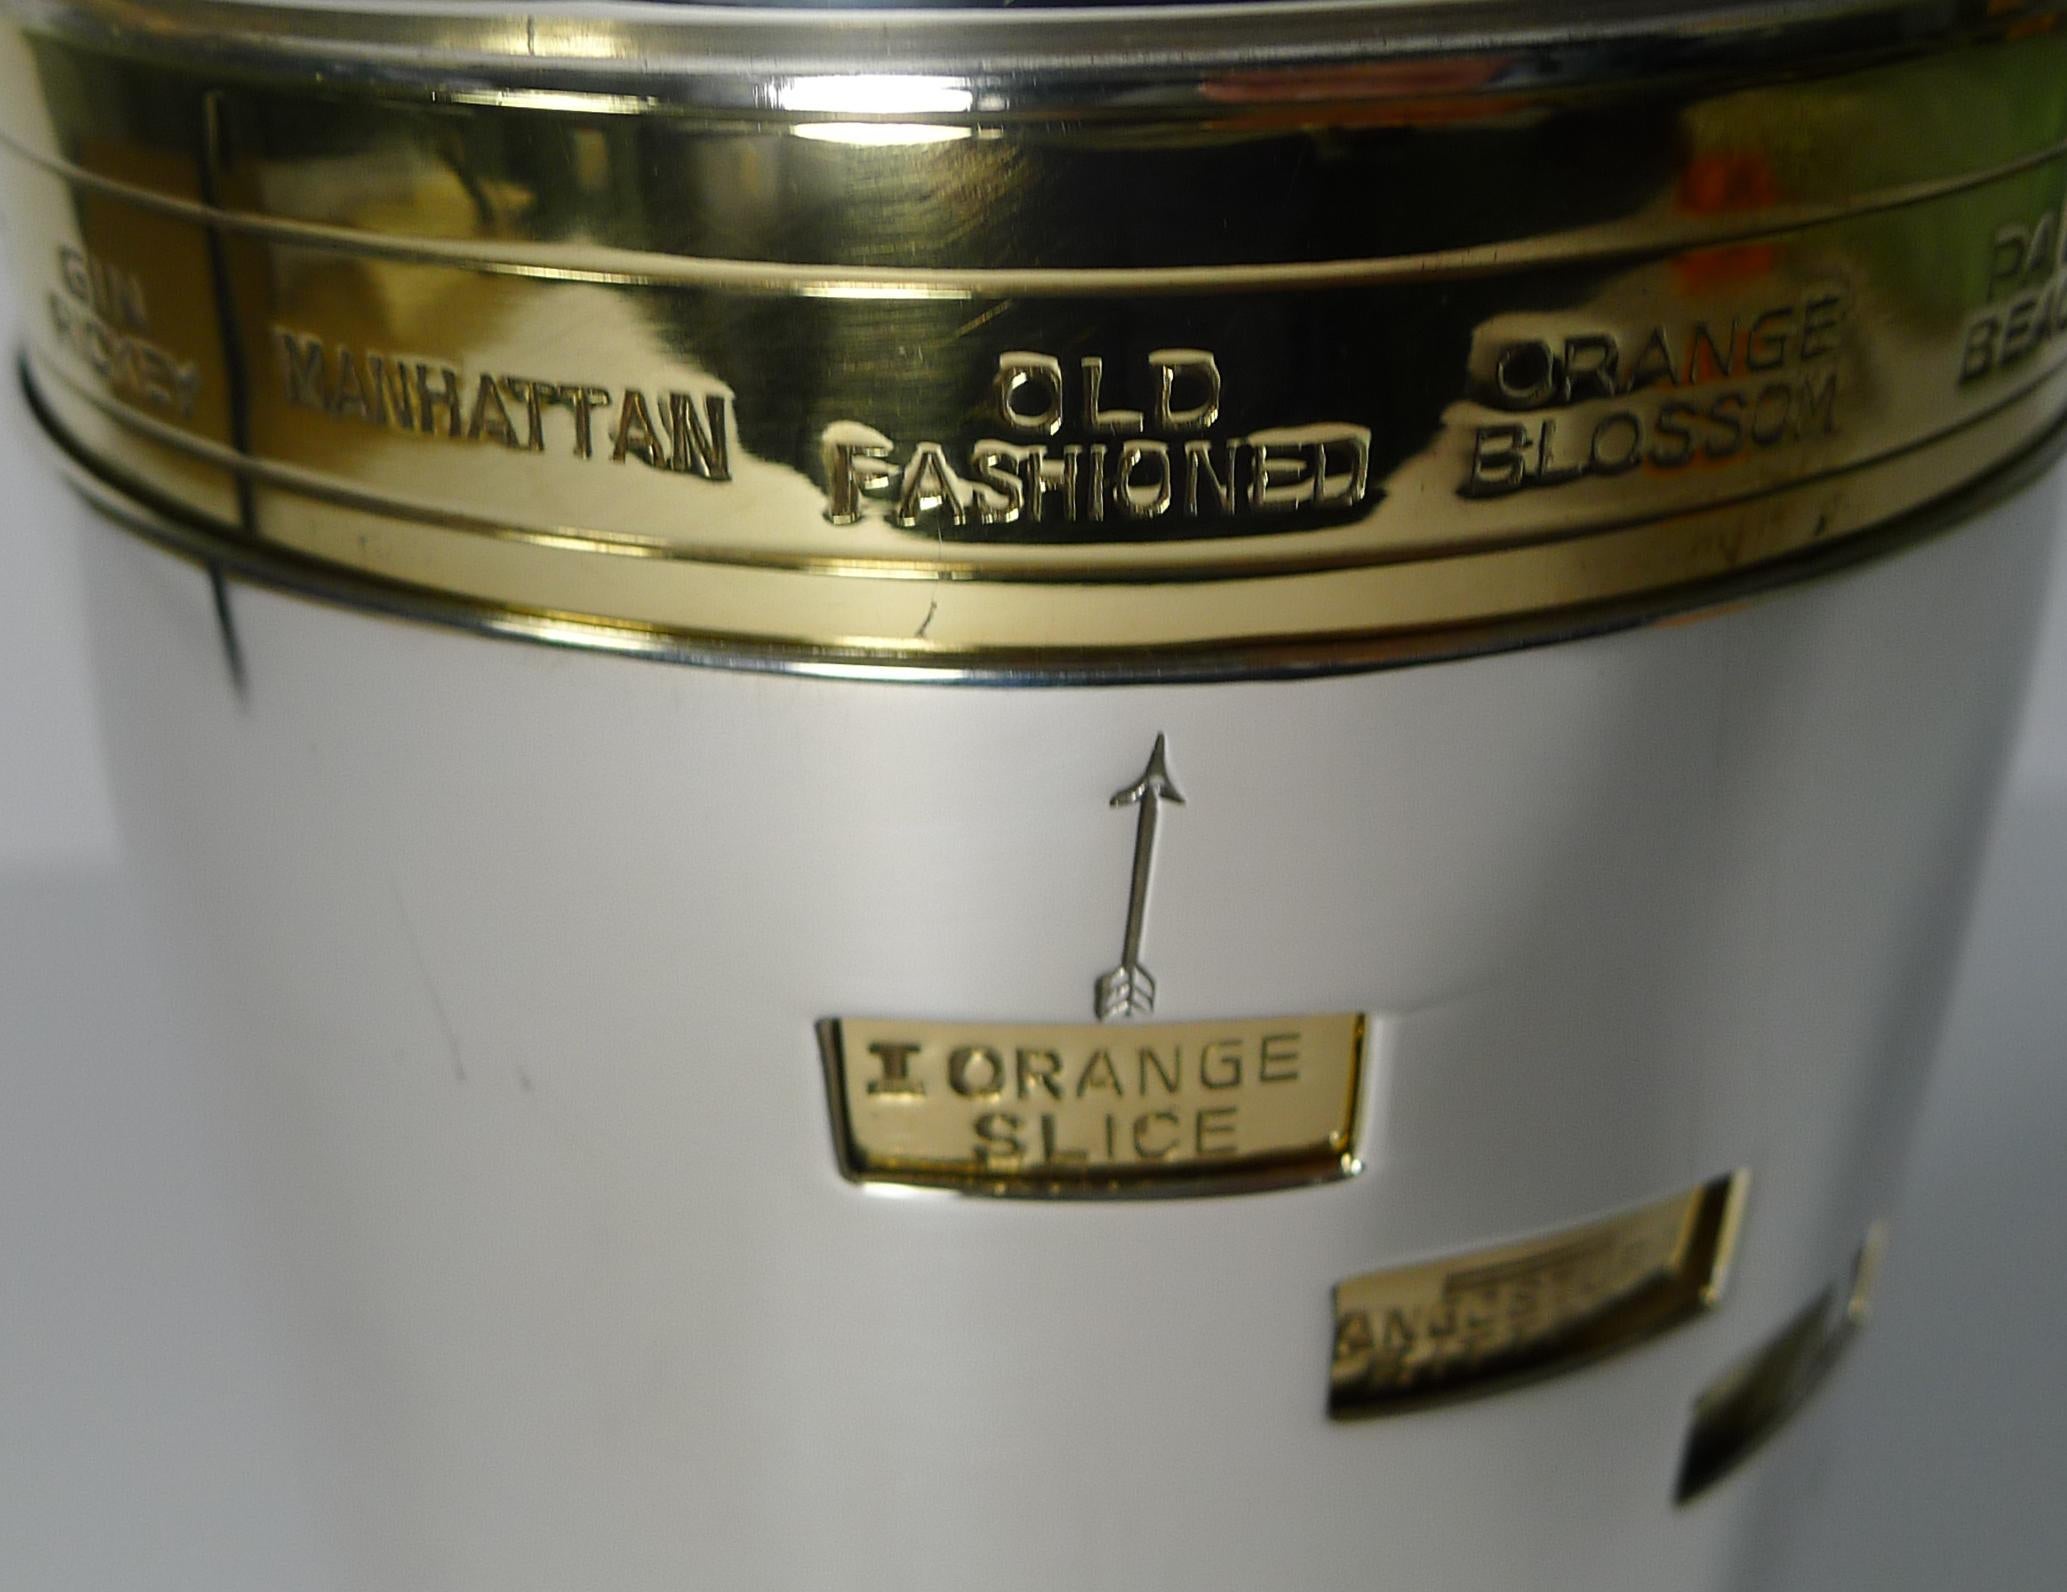 A fabulous vintage Italian recipe cocktail Shaker having been professionally restored to its former glory by our silversmith.

The arrow on the outer sleeve is pointed to the desired cocktail and the ingredients are revealed in each of the